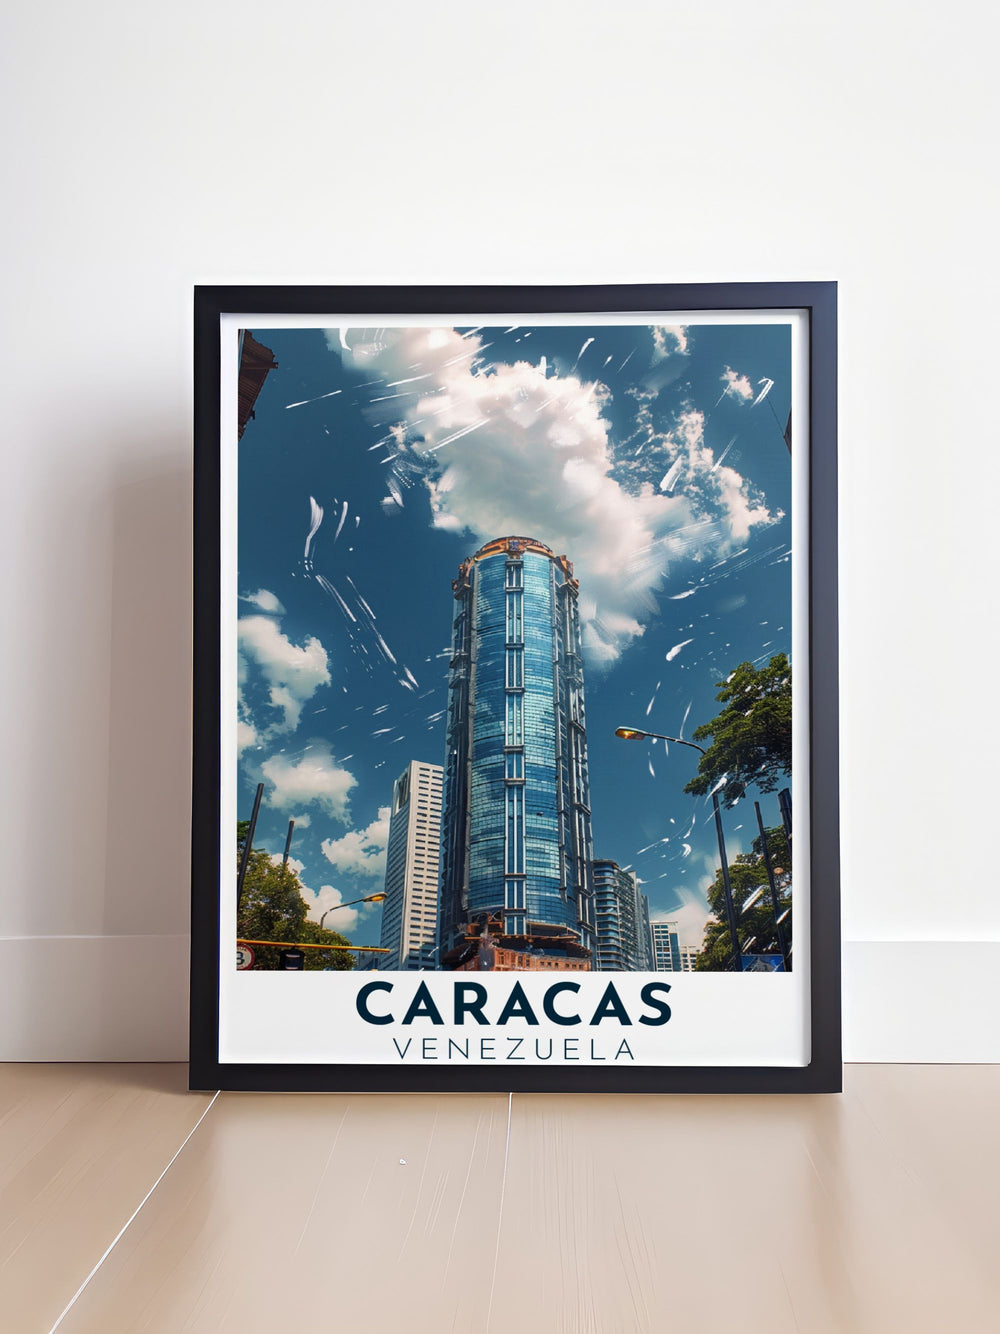 The picturesque scenery of Caracas with Parque Central Complex as a focal point is featured in this vibrant travel poster, perfect for adding Venezuelas unique charm to your home.